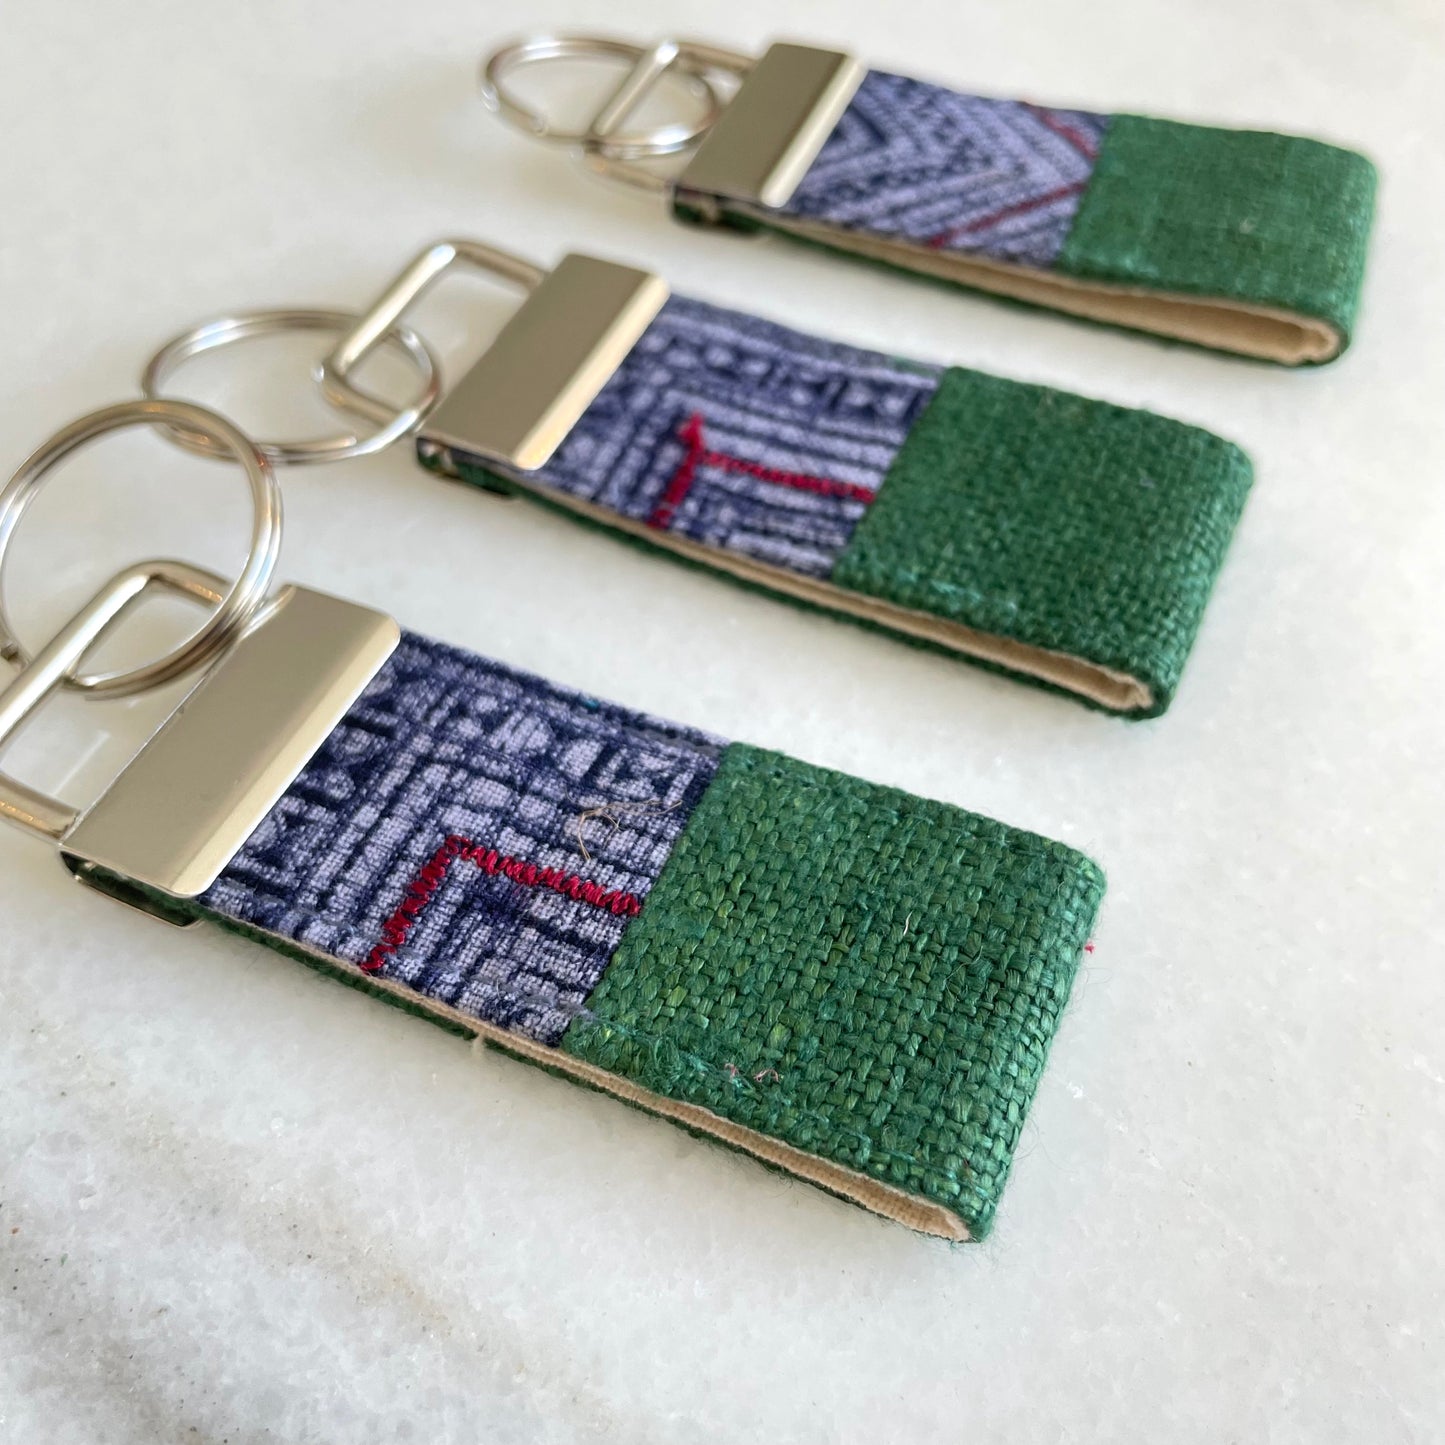 Classic green hemp fabric keychain with vintage batik patch, stainless metal key fob